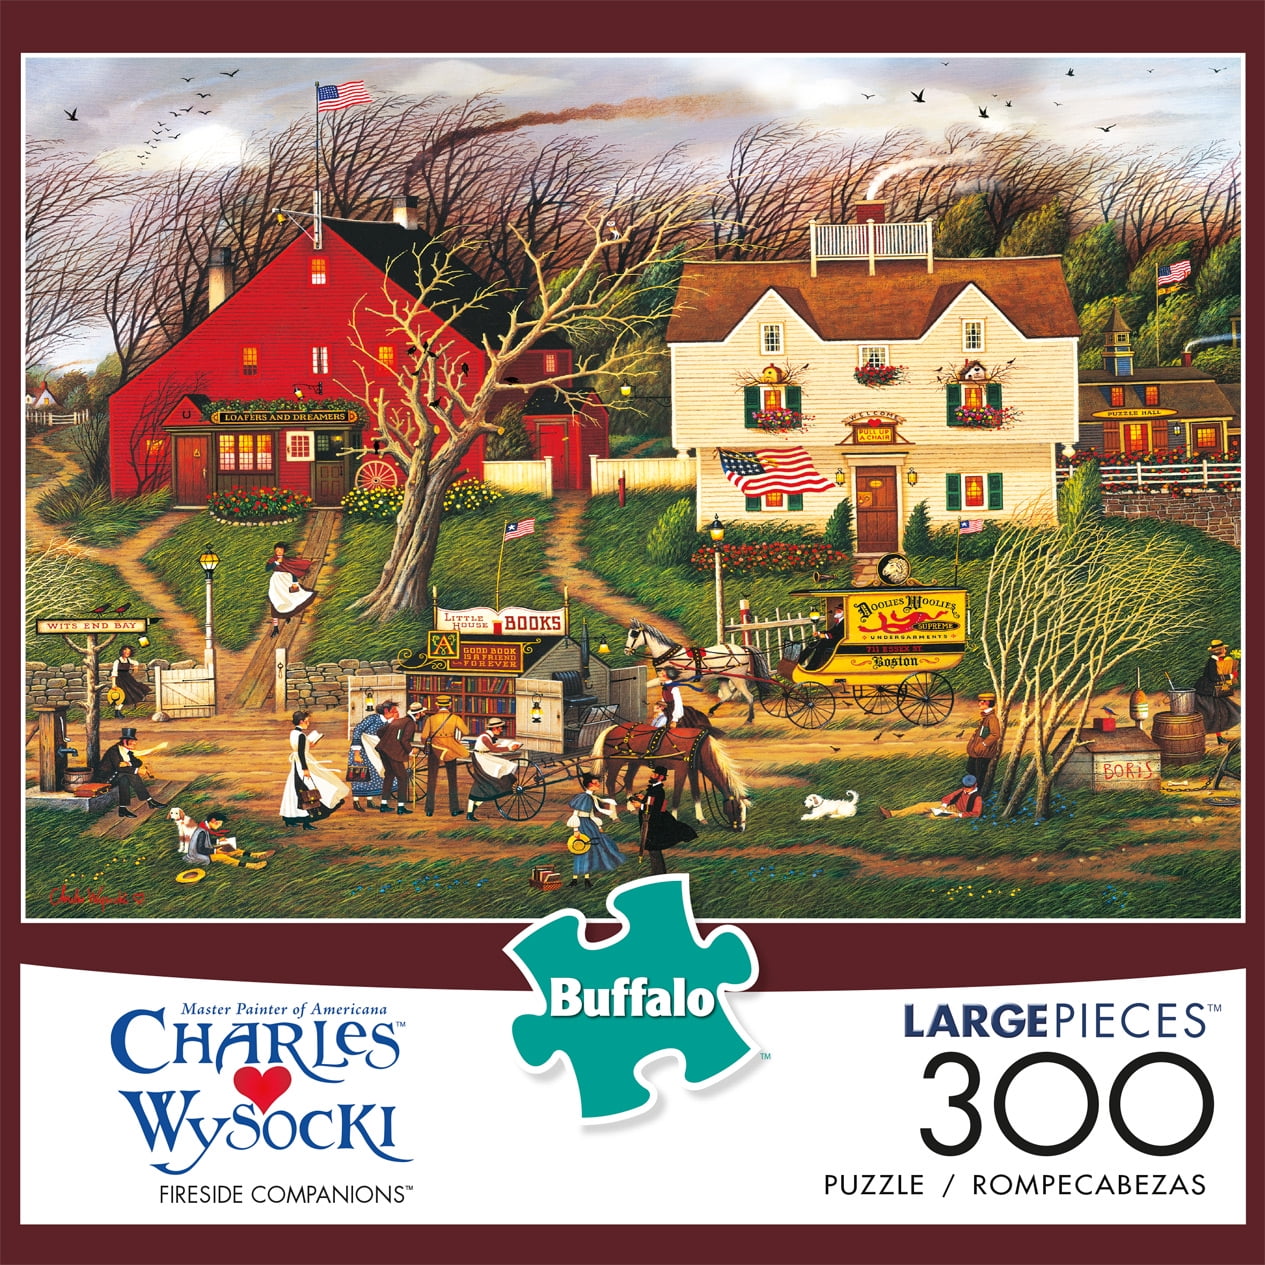 1000 Piece Jigsaw Puzzle Charles Wysocki by The Sea Buffalo Games 27 X 20 for sale online 